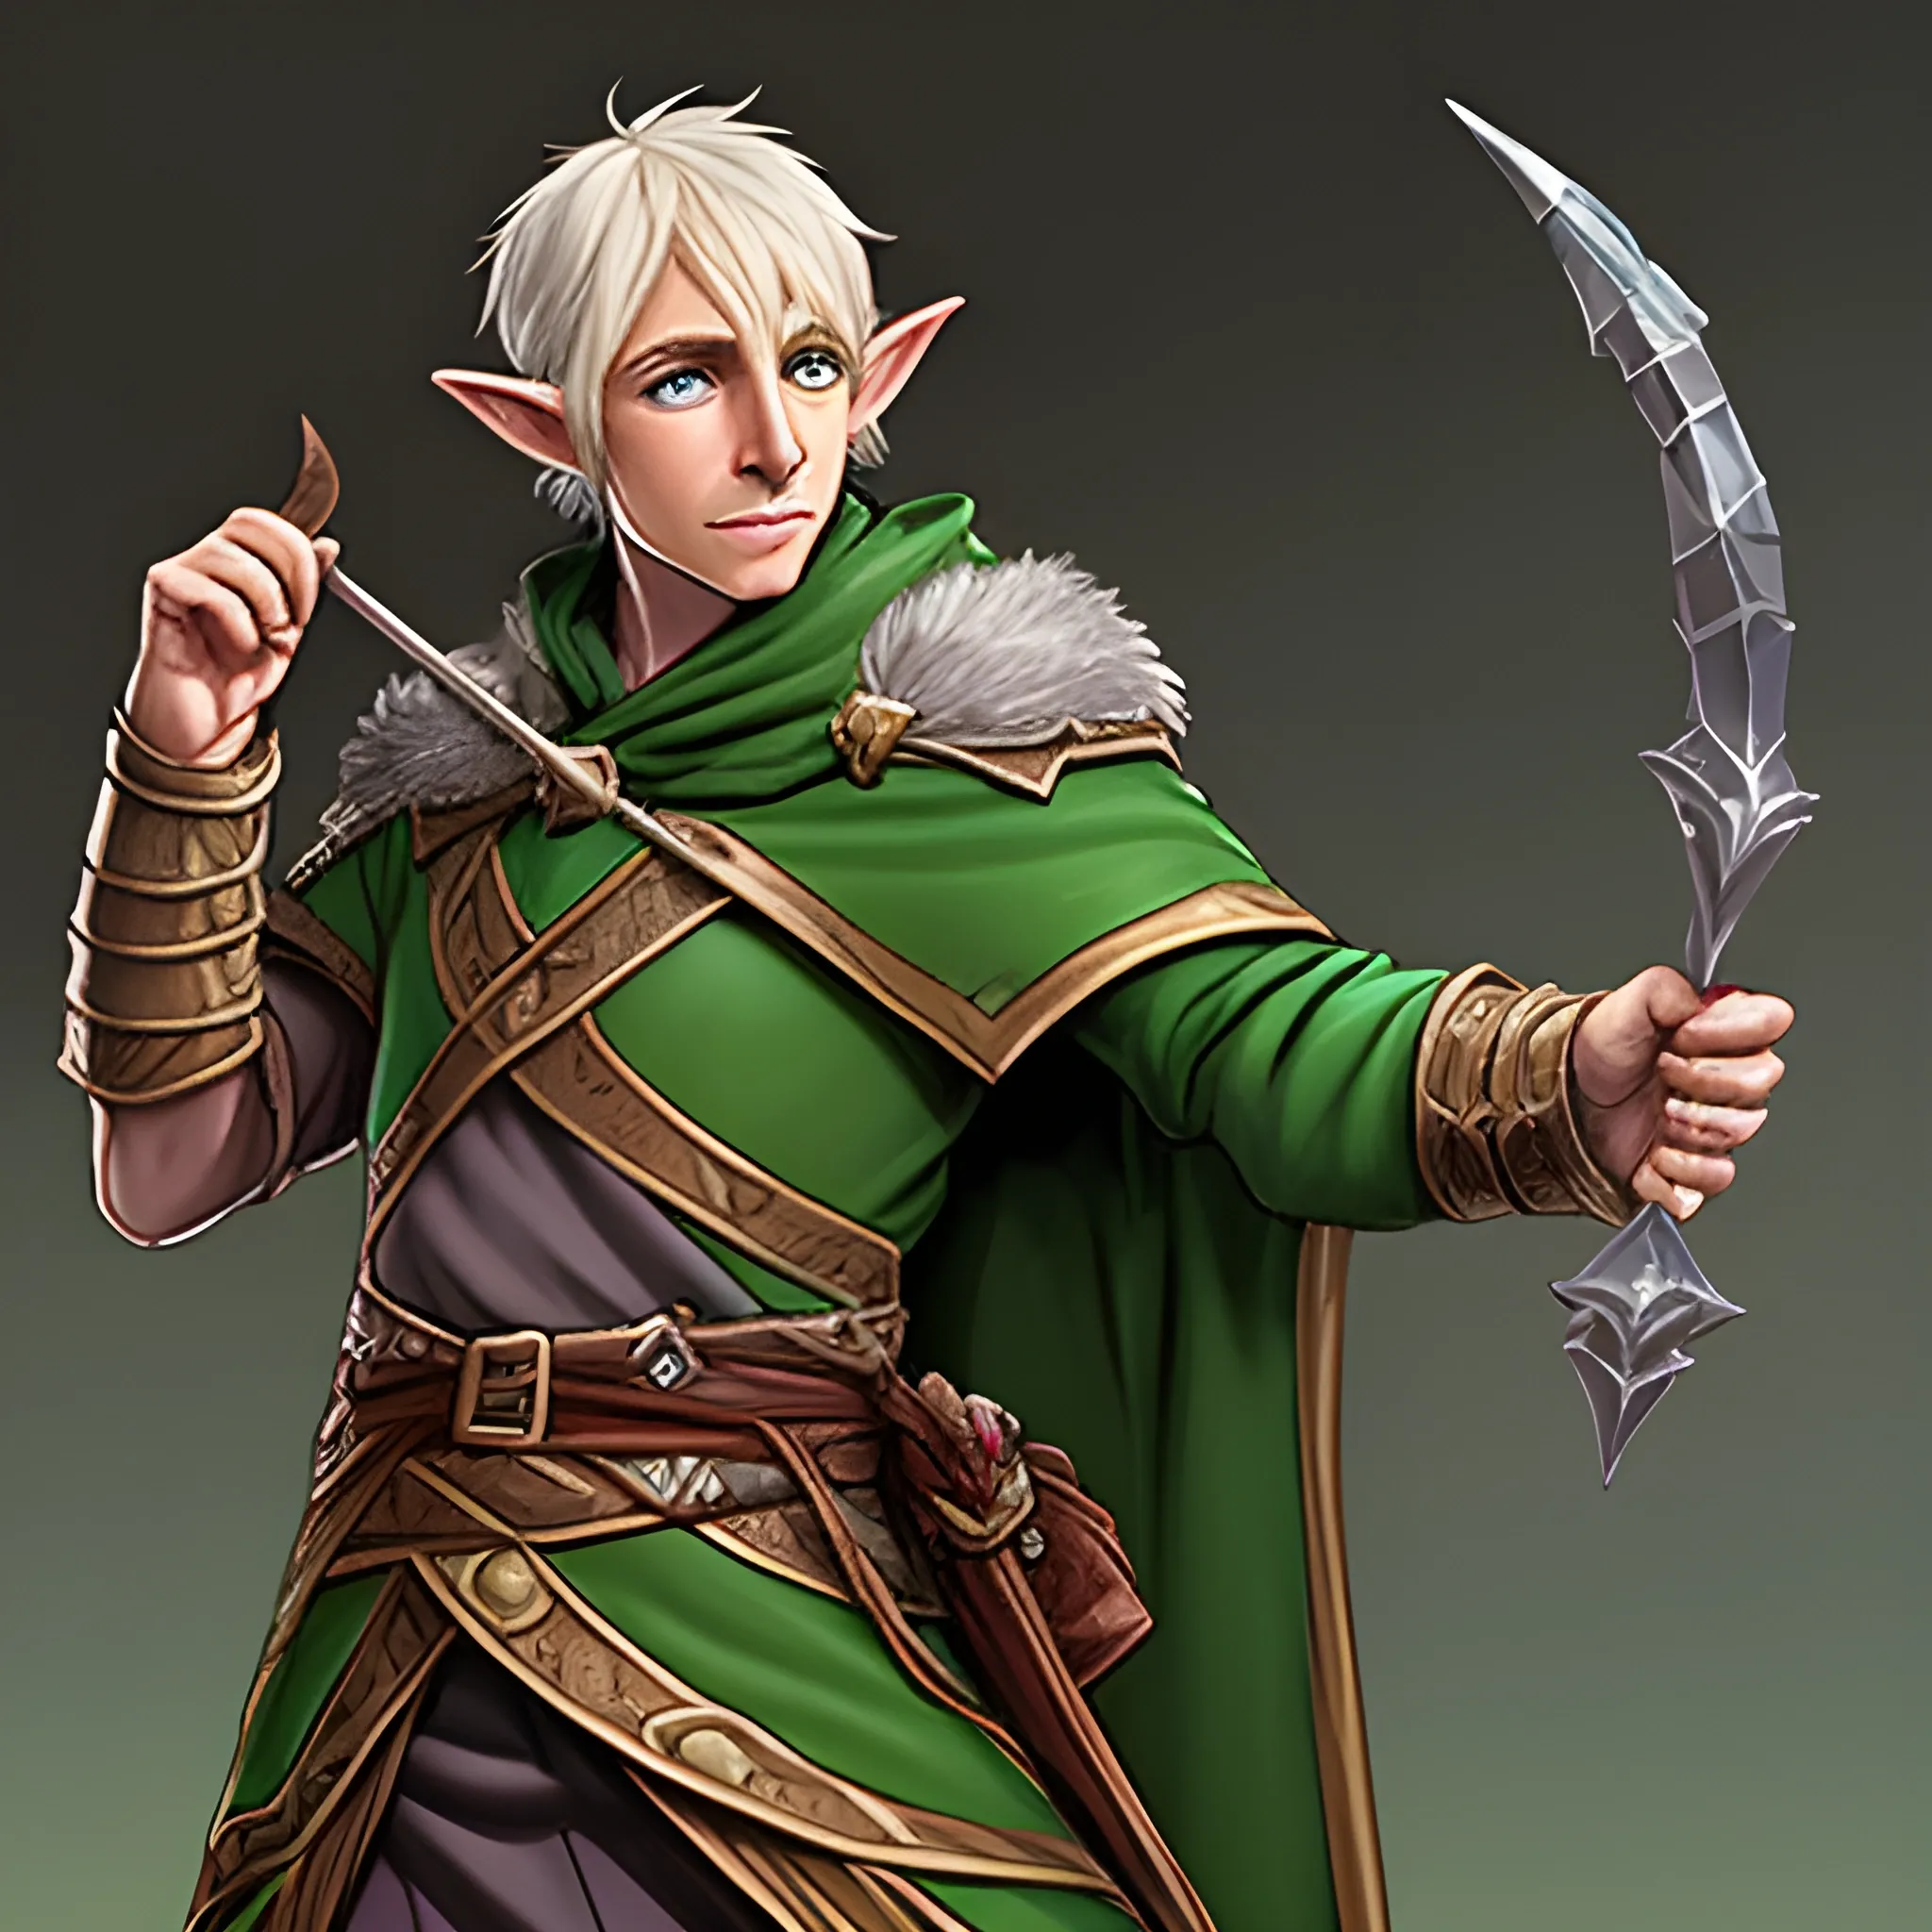 Create a dungeons and dragons character which is an Eladrin Elf ...